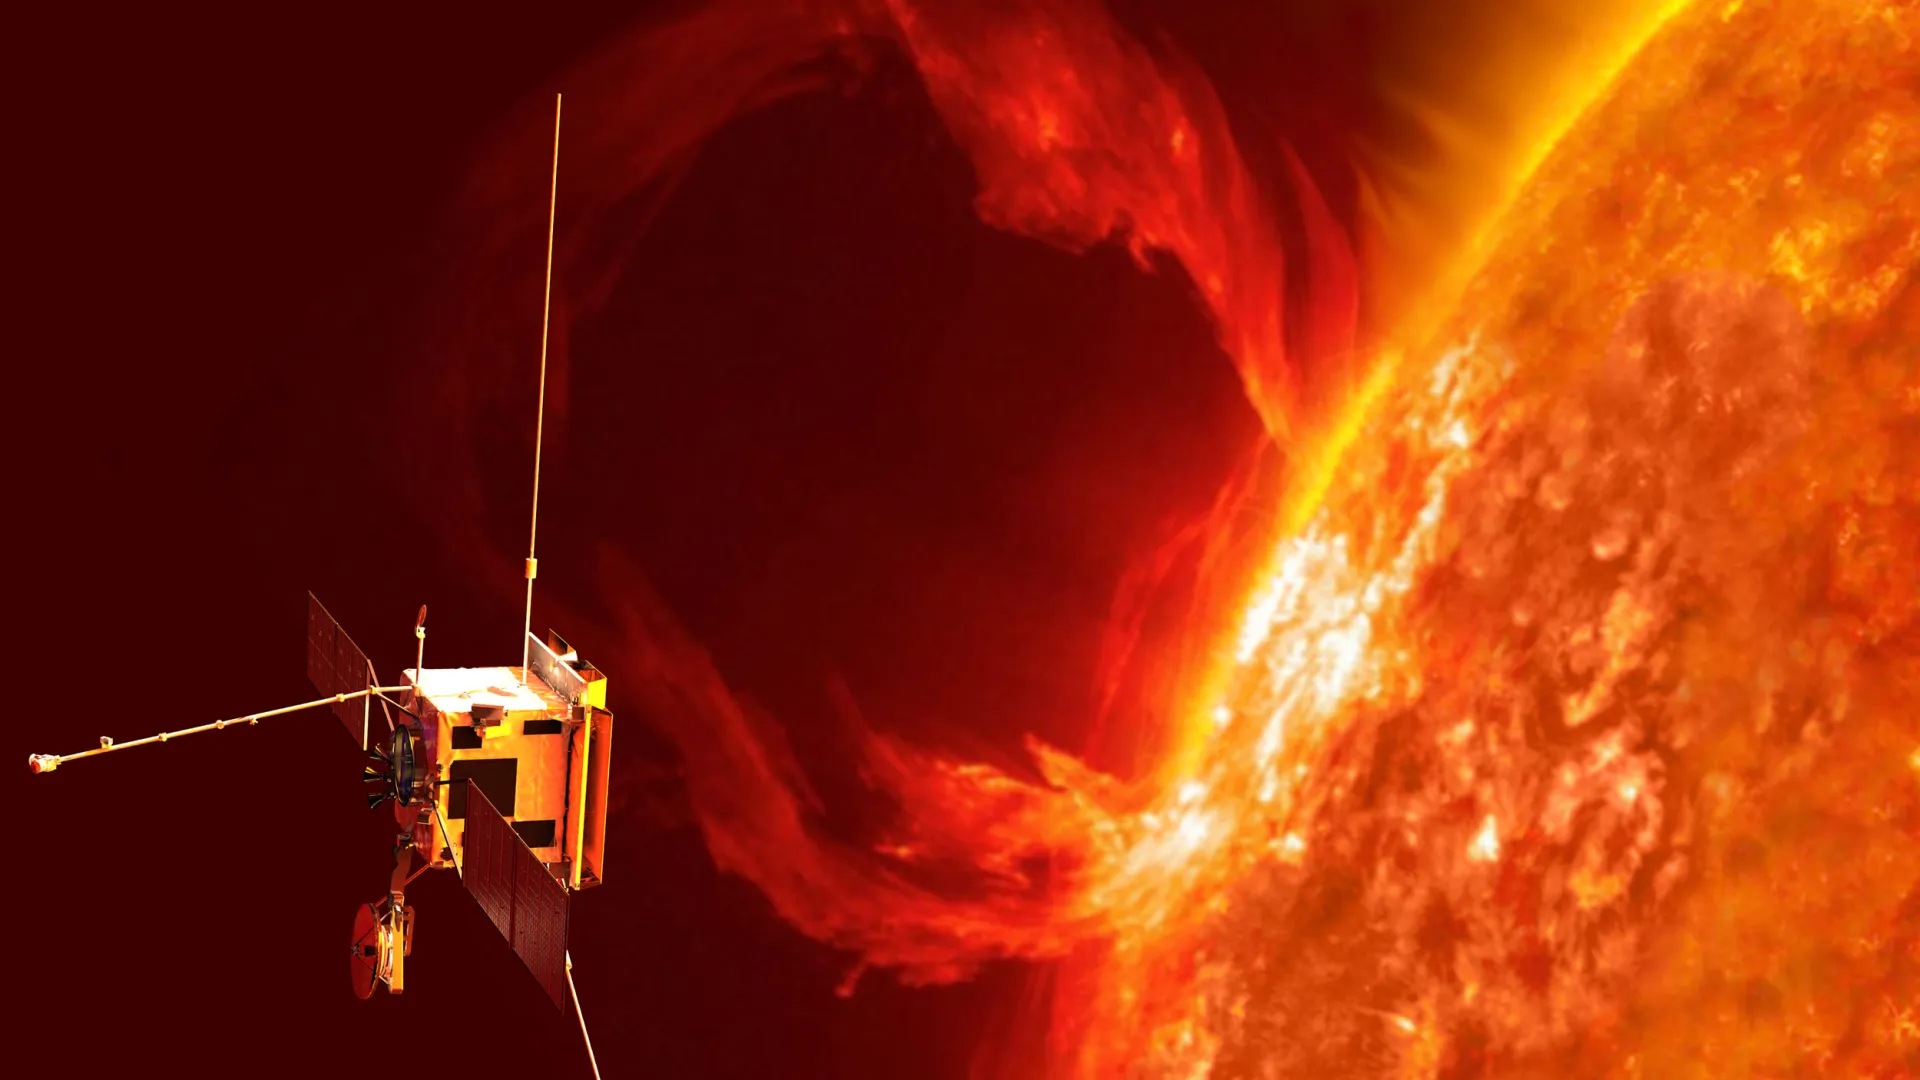 Solar Orbiter will get very close to the Sun. This will allow it to observe and study the solar atmosphere with high spatial resolution and collect unique data and images of the Sun. Copyright: ESA/AOES).